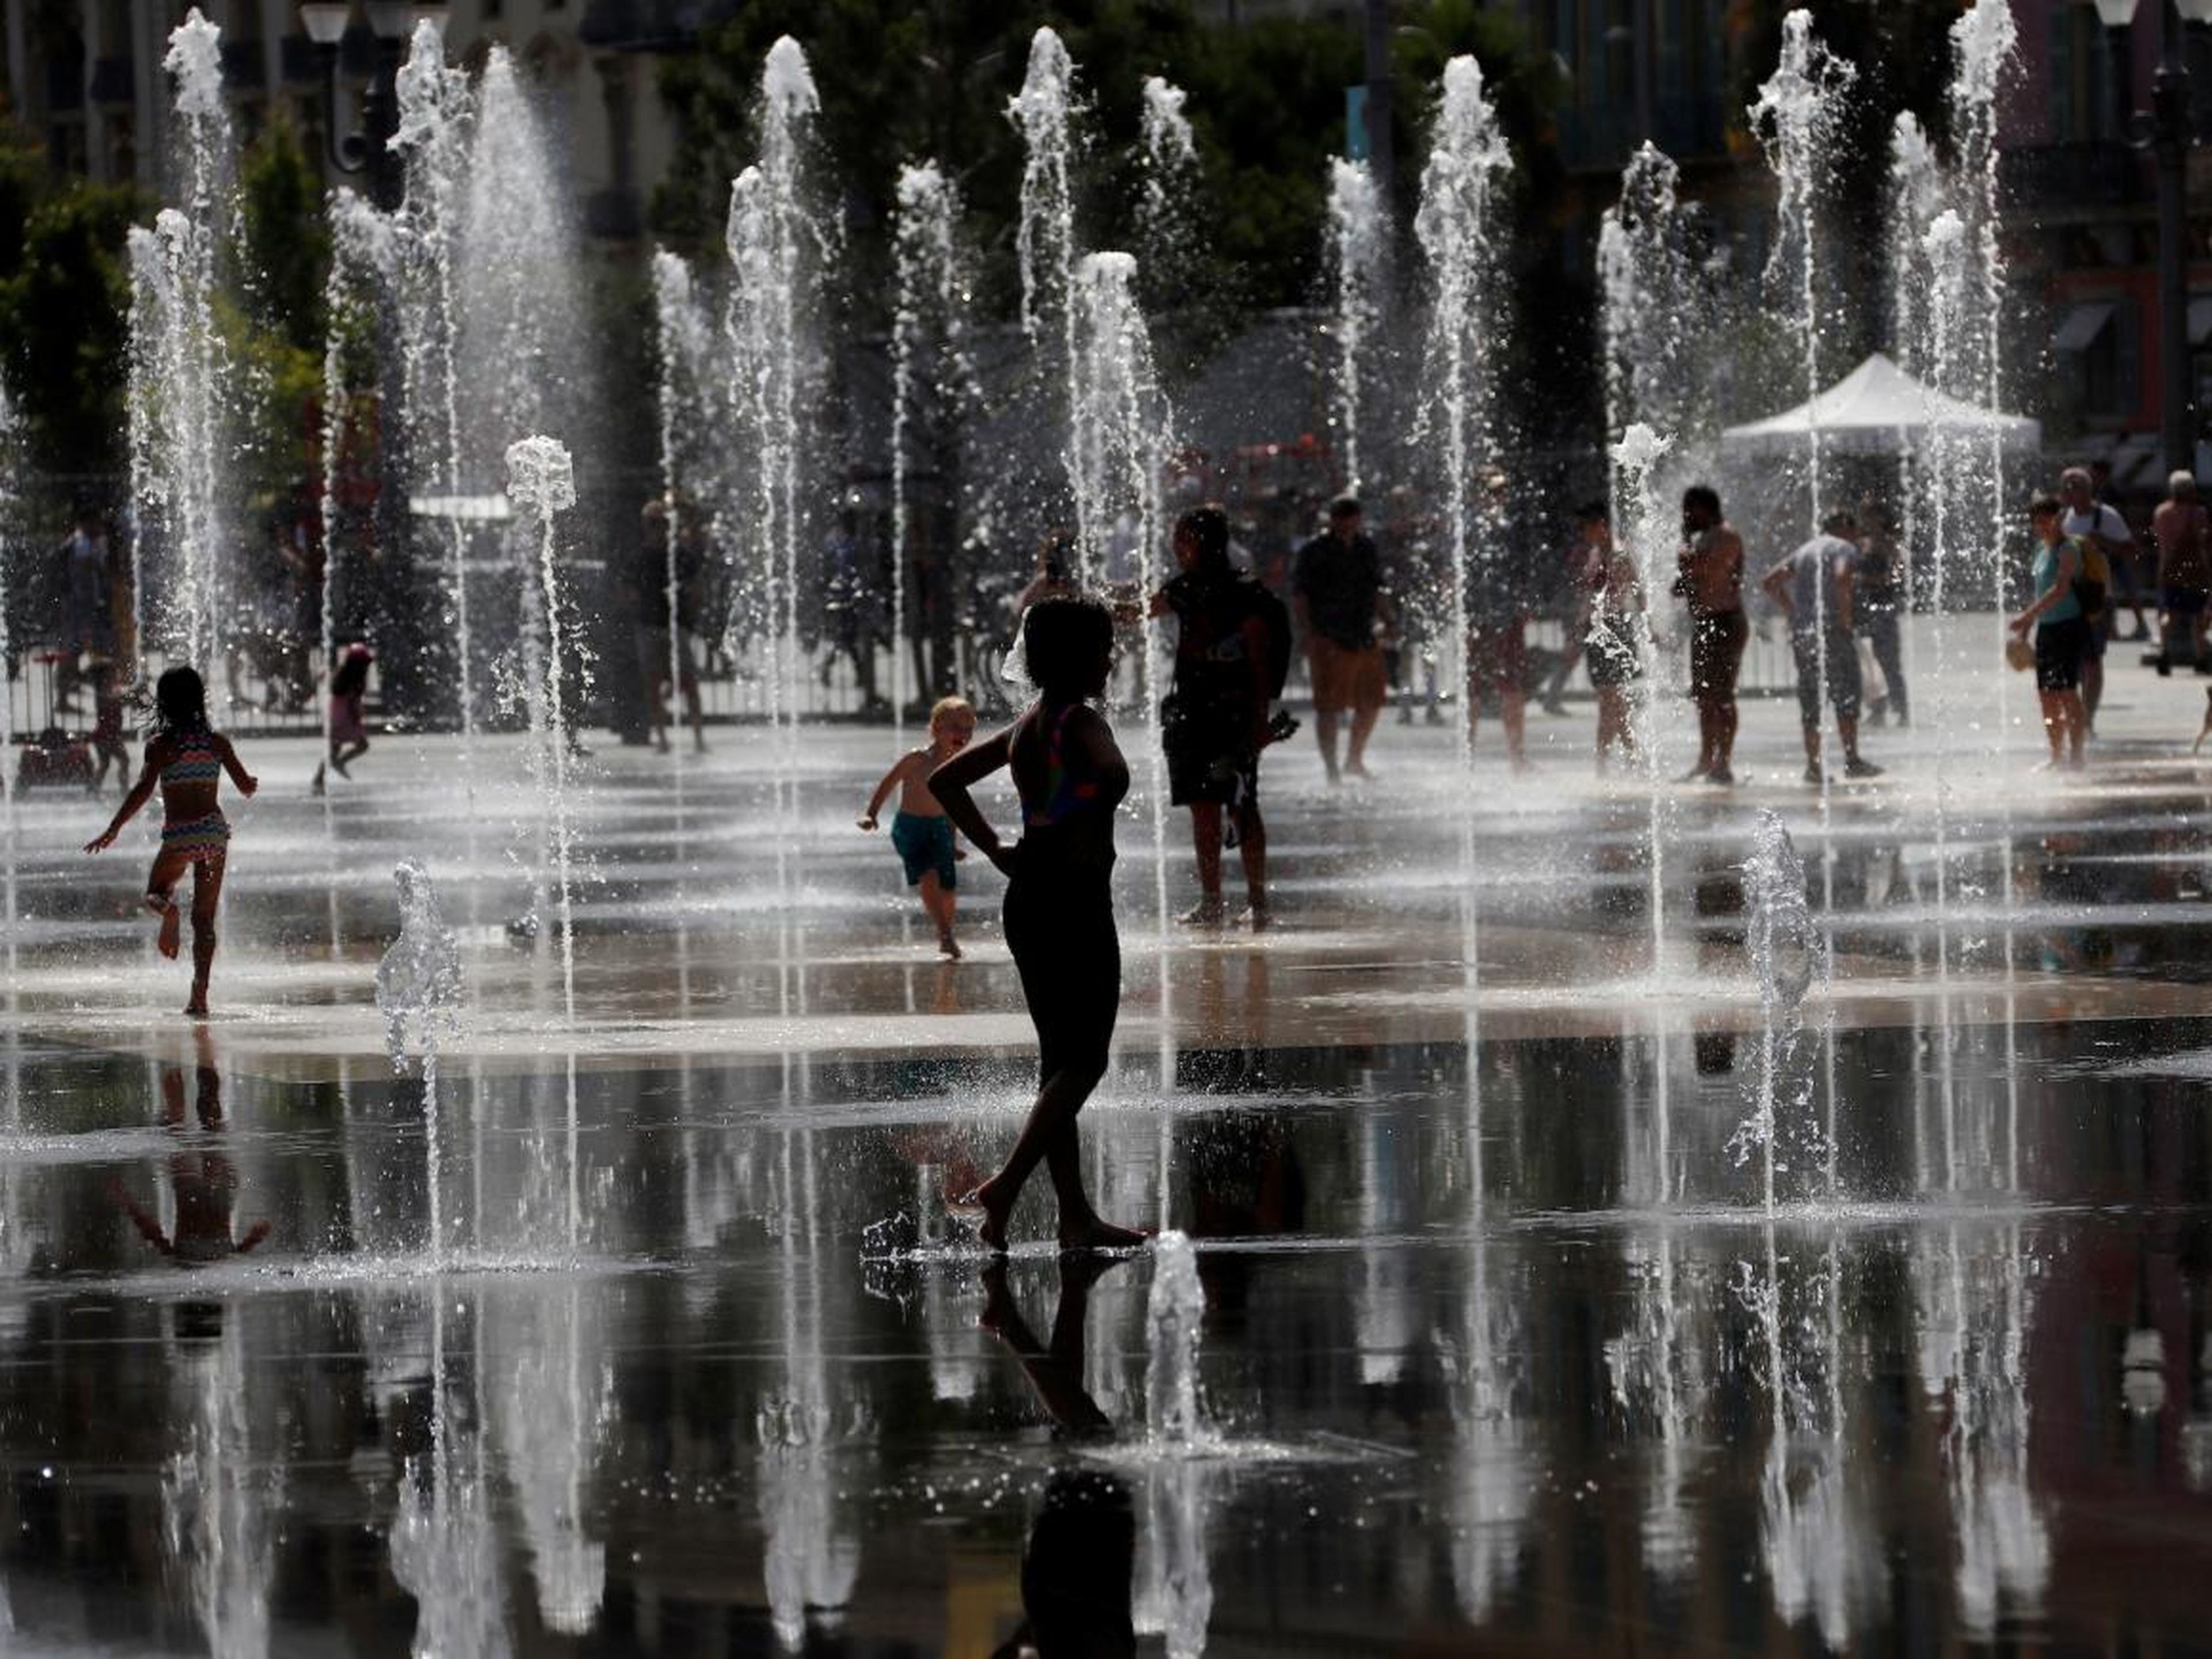 People cool off in water fountains in Nice.